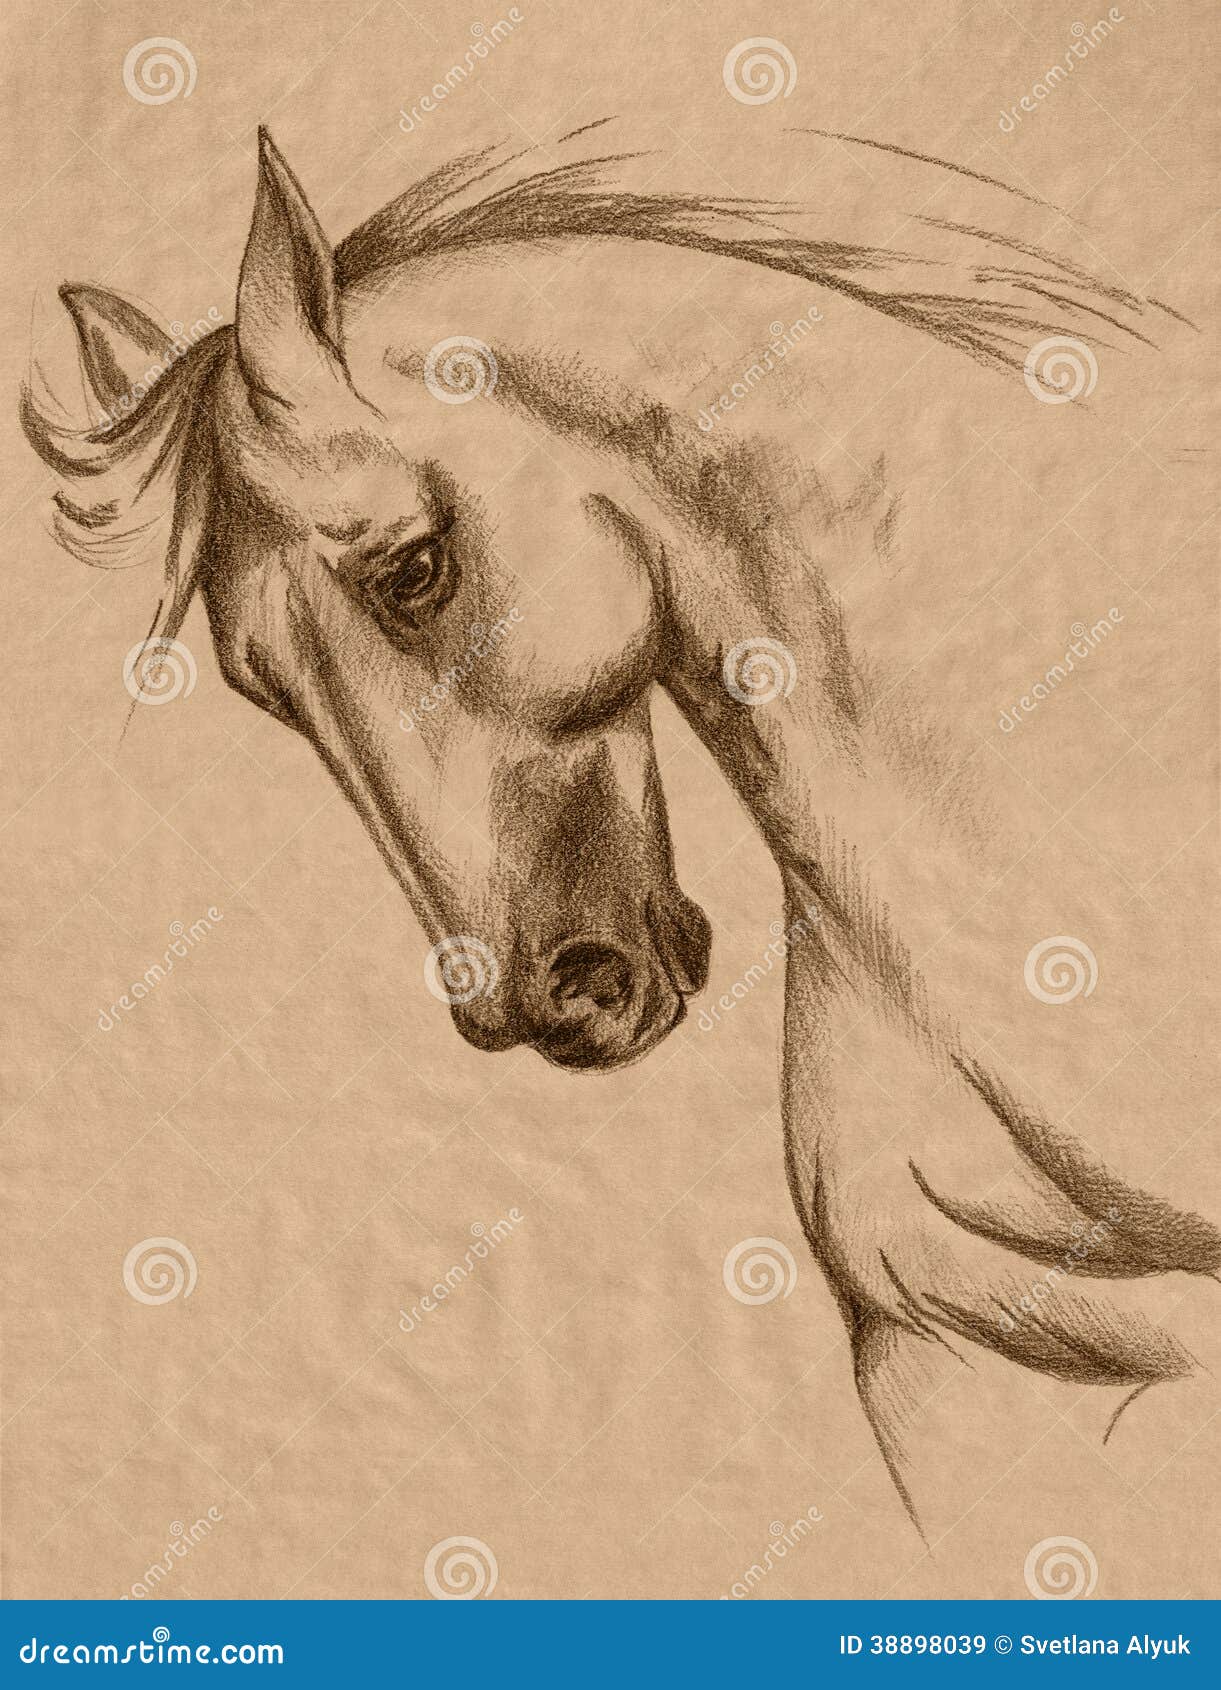 ArtStation - Freehand drawing of a horse with a pencil